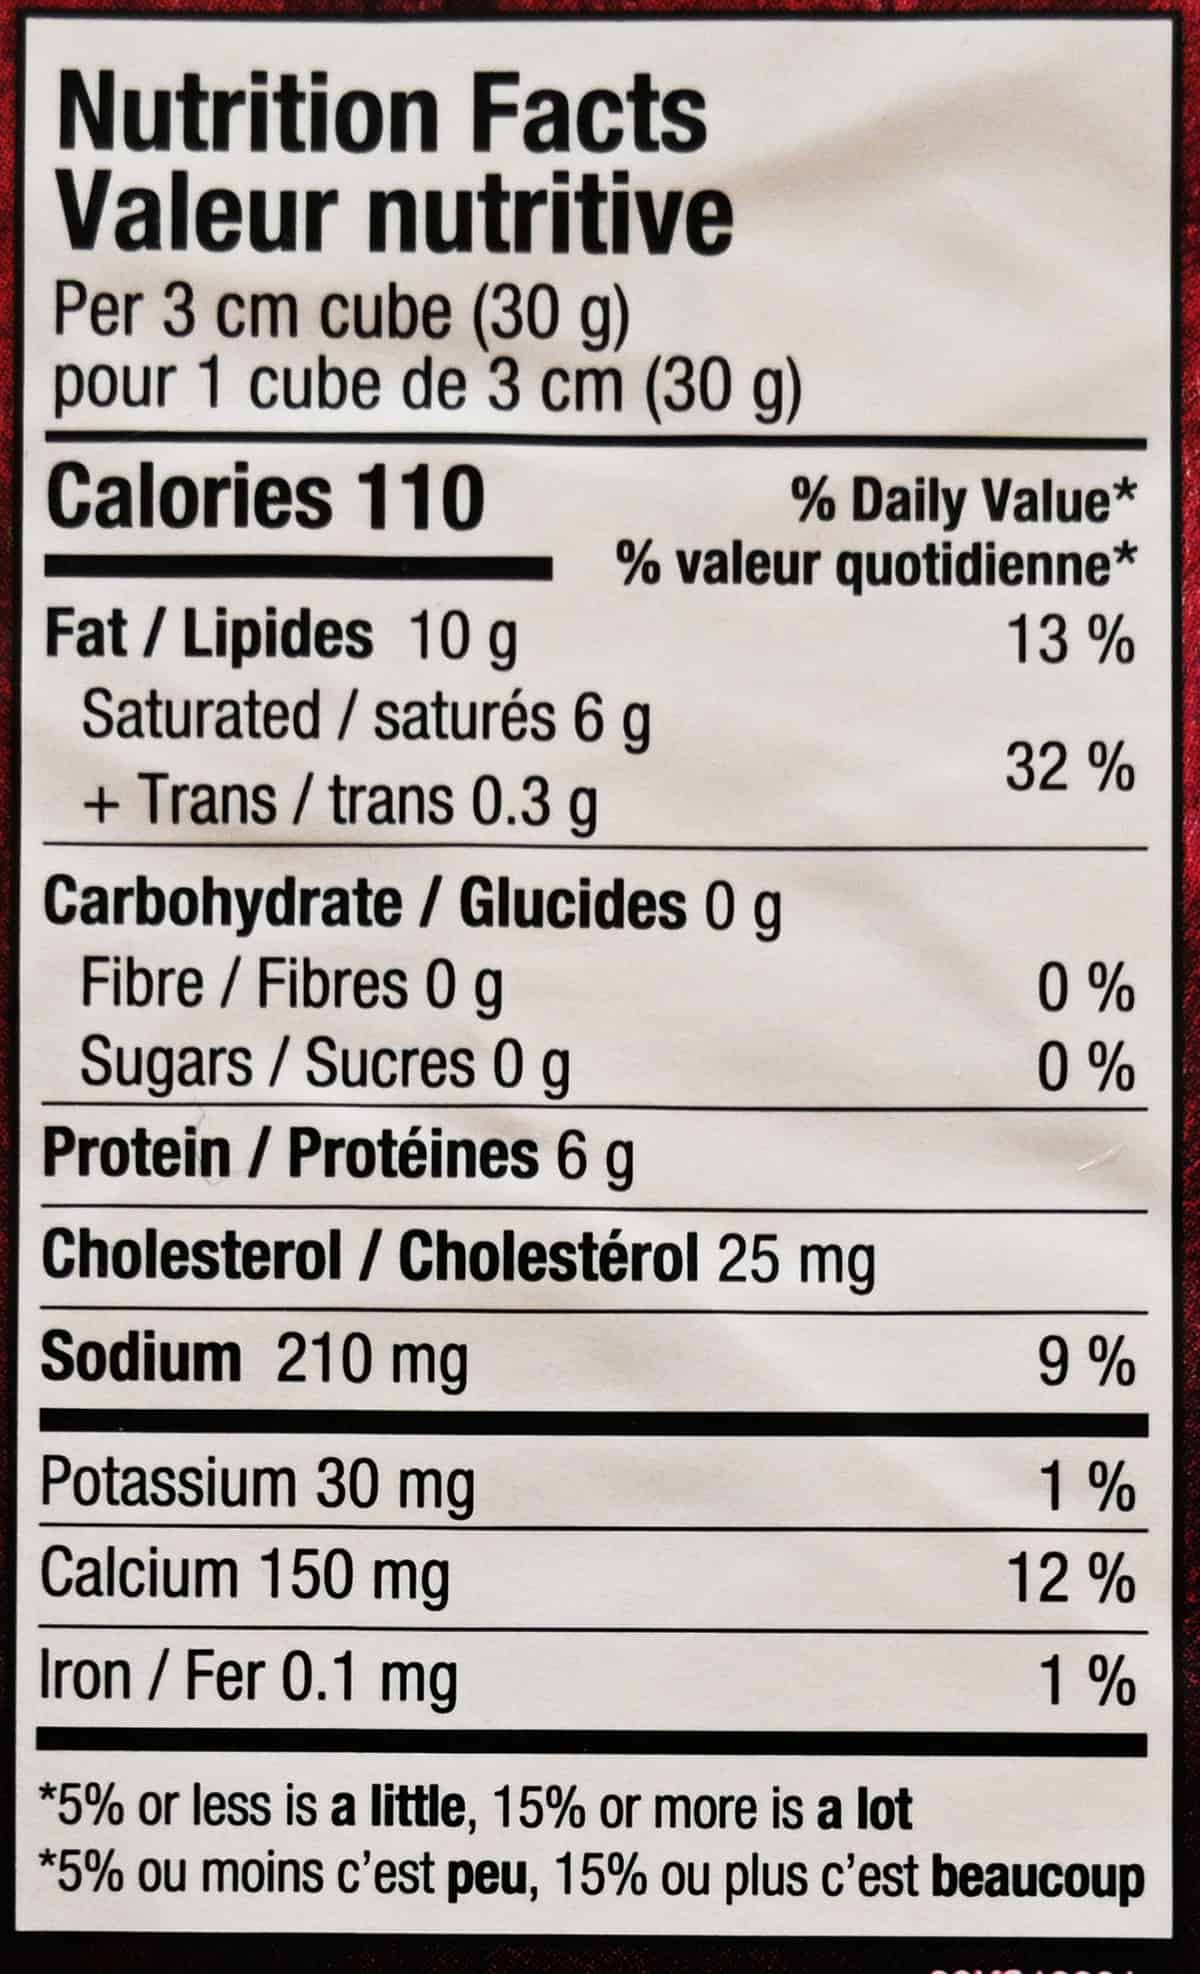 Image of the brie nutrition facts label from the package.